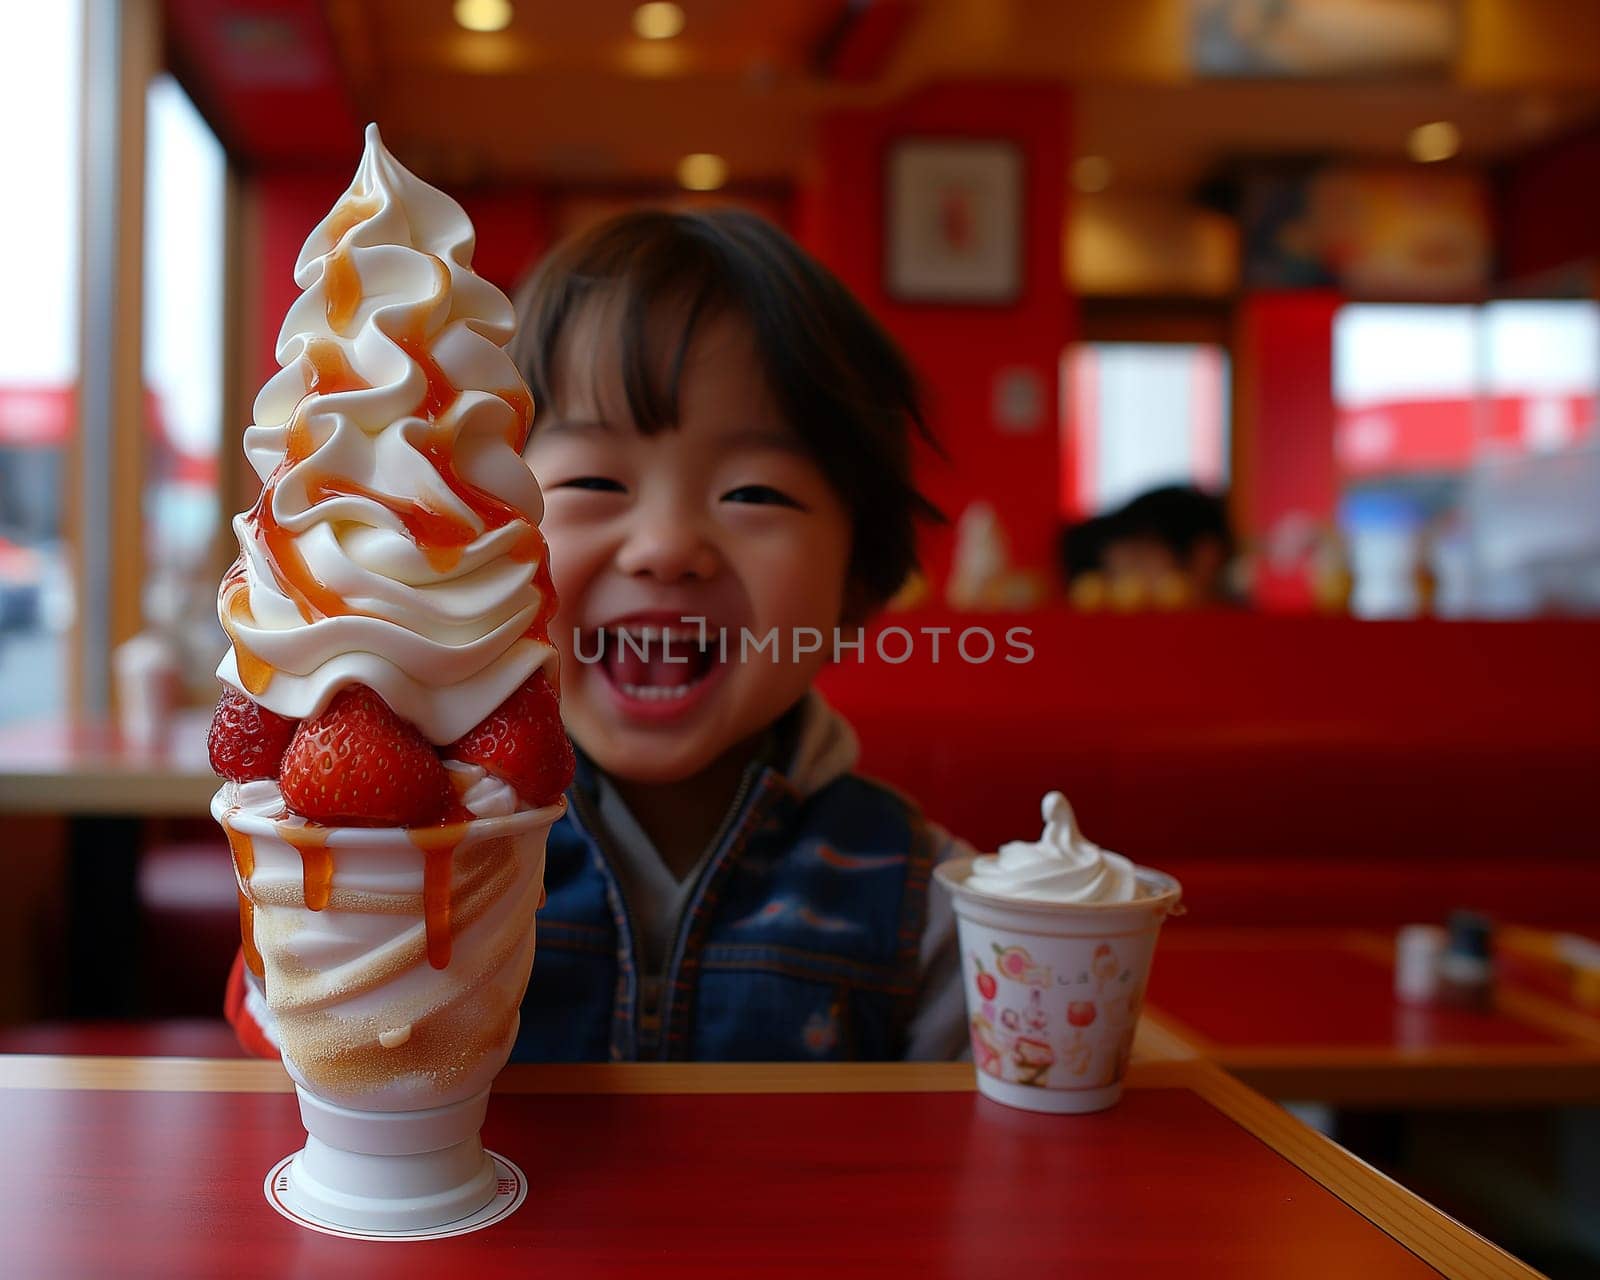 A joyful child smiles beside a large strawberry topped soft serve ice cream. by Hype2art